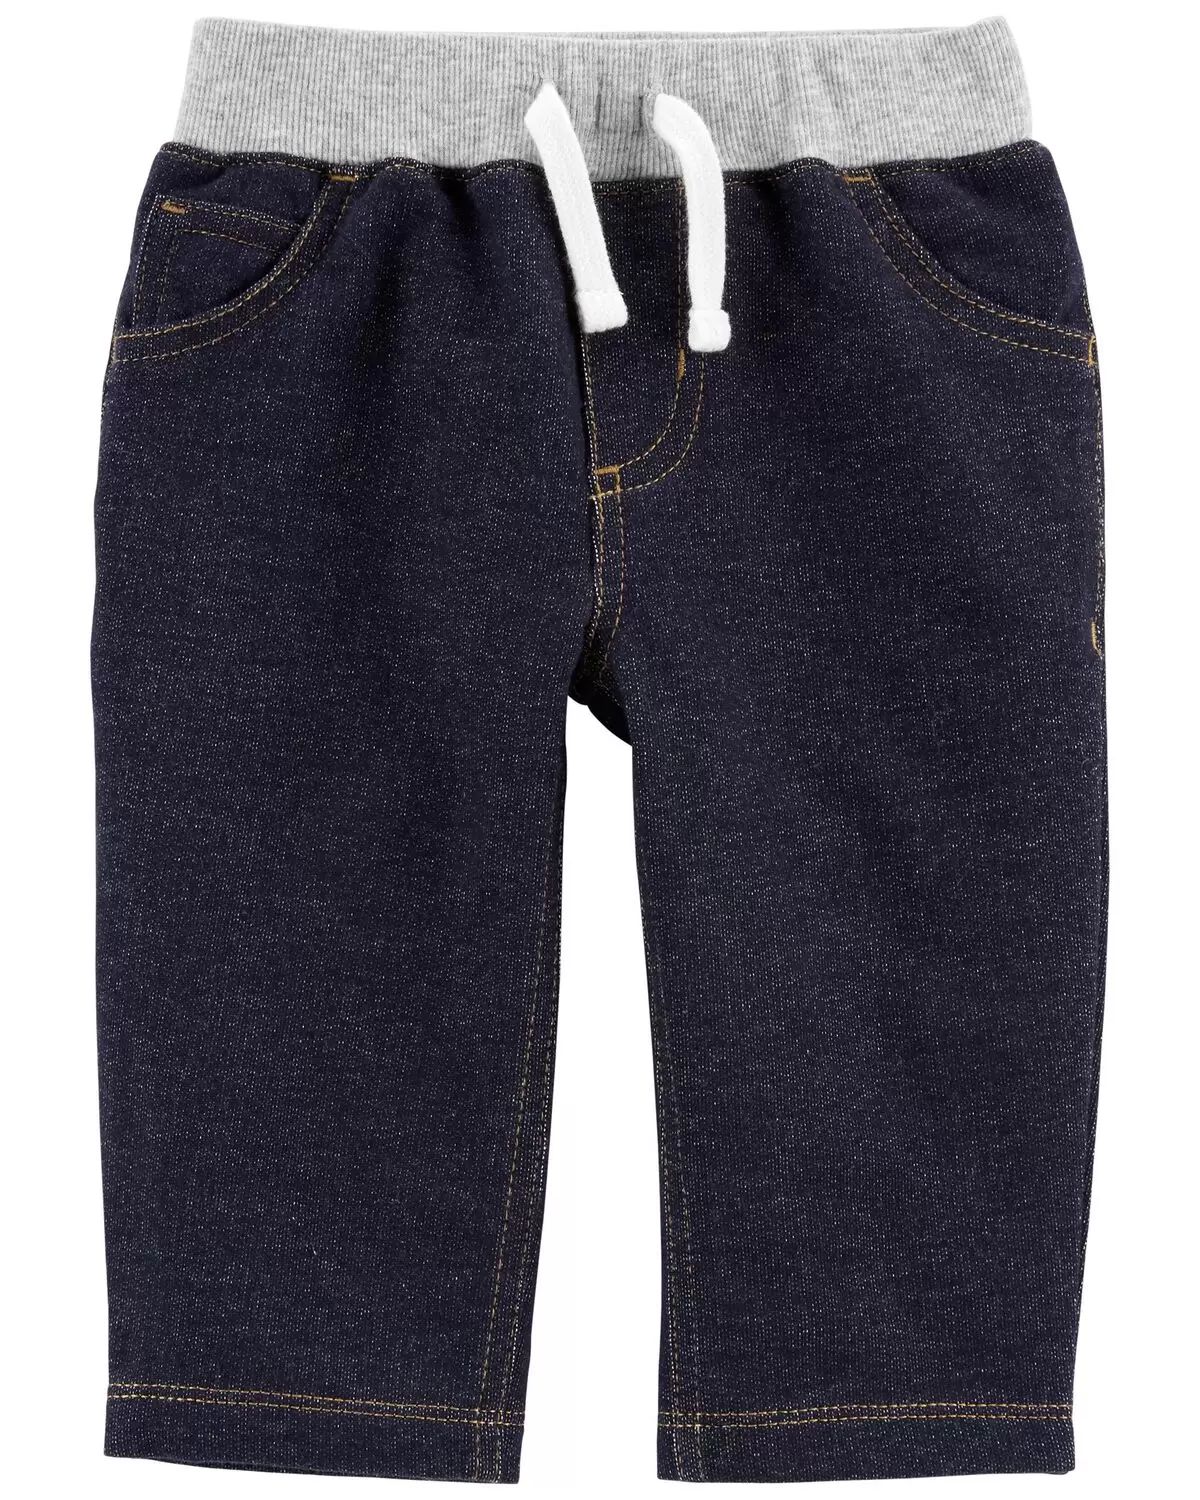 Navy Baby Pull-On Knit Denim Pants | carters.com | Carter's